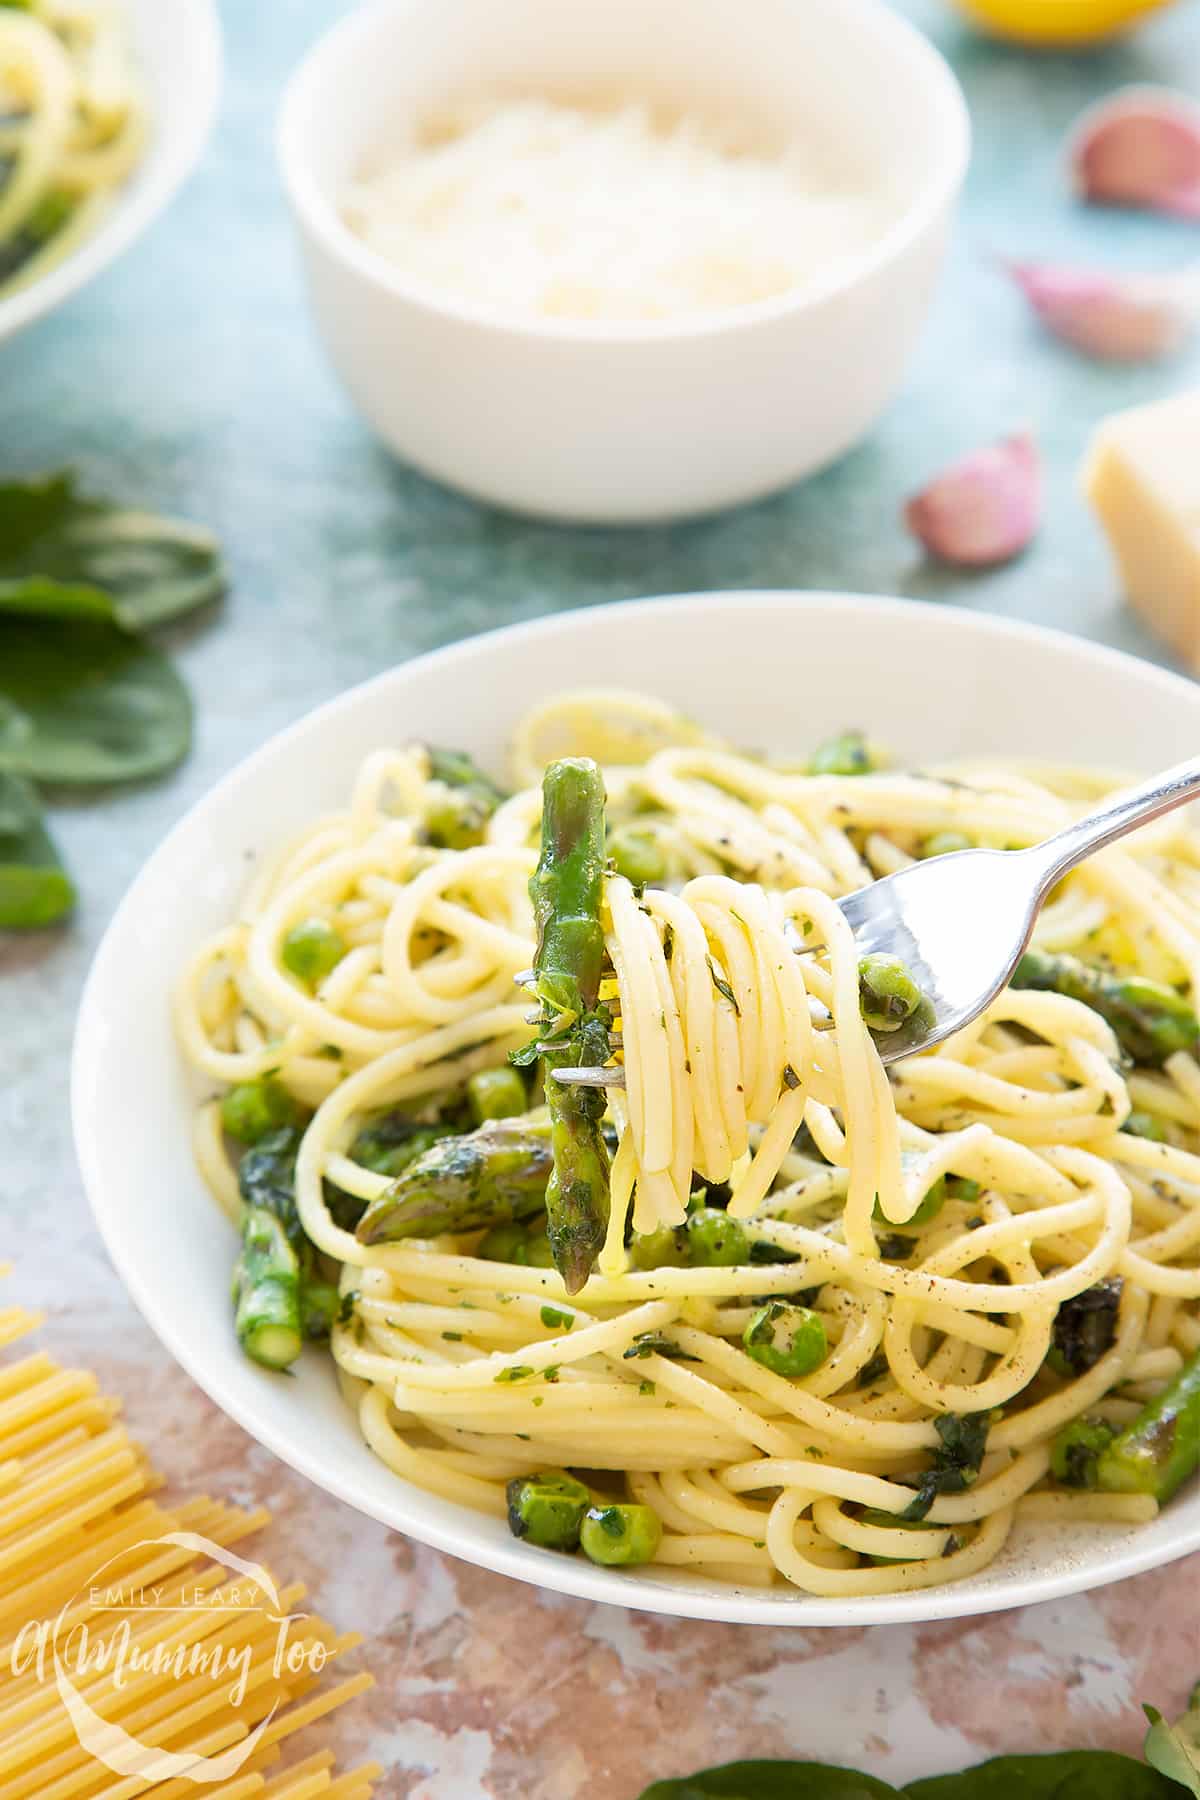 Summer spaghetti with spinach, basil, asparagus and peas, served in a white bowl. A fork wound with spaghetti is in the foreground.